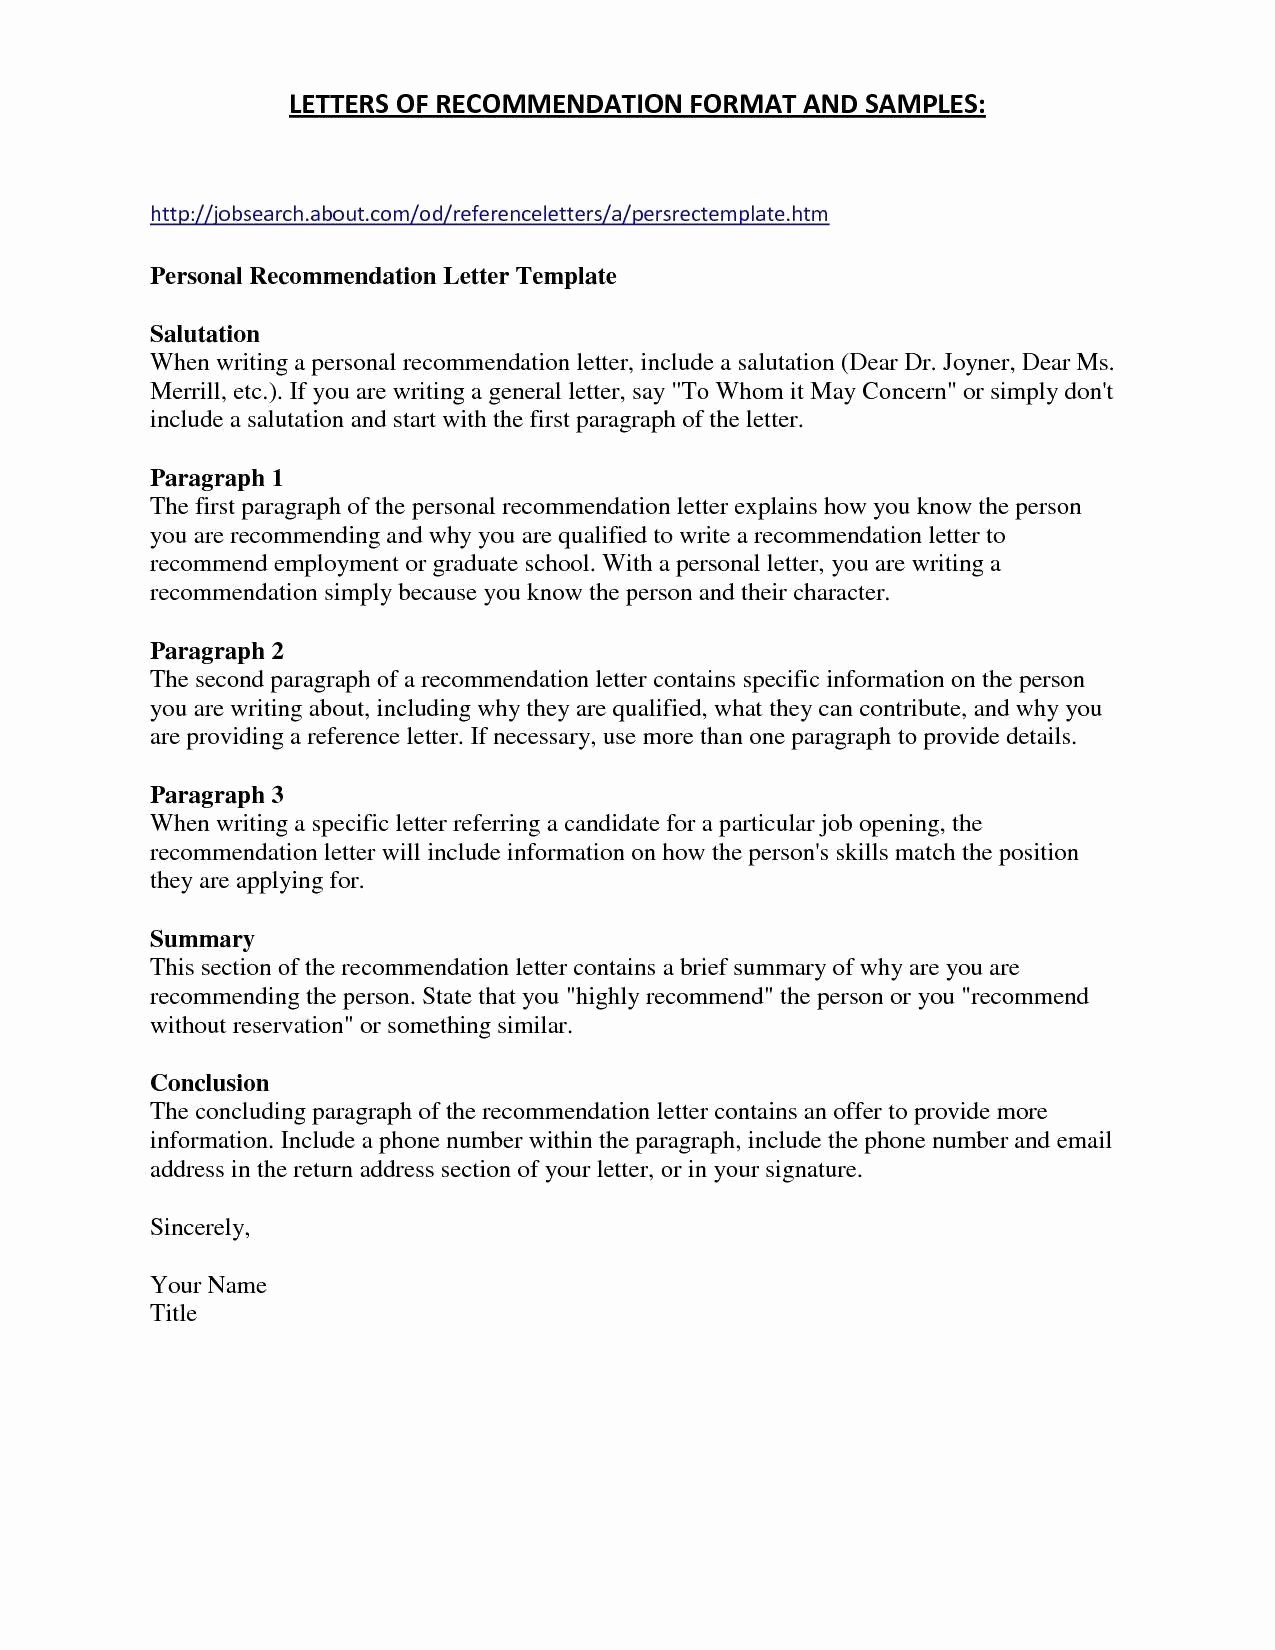 Lease Termination Letter Template - format Job Termination Letter New Lease Termination Letter